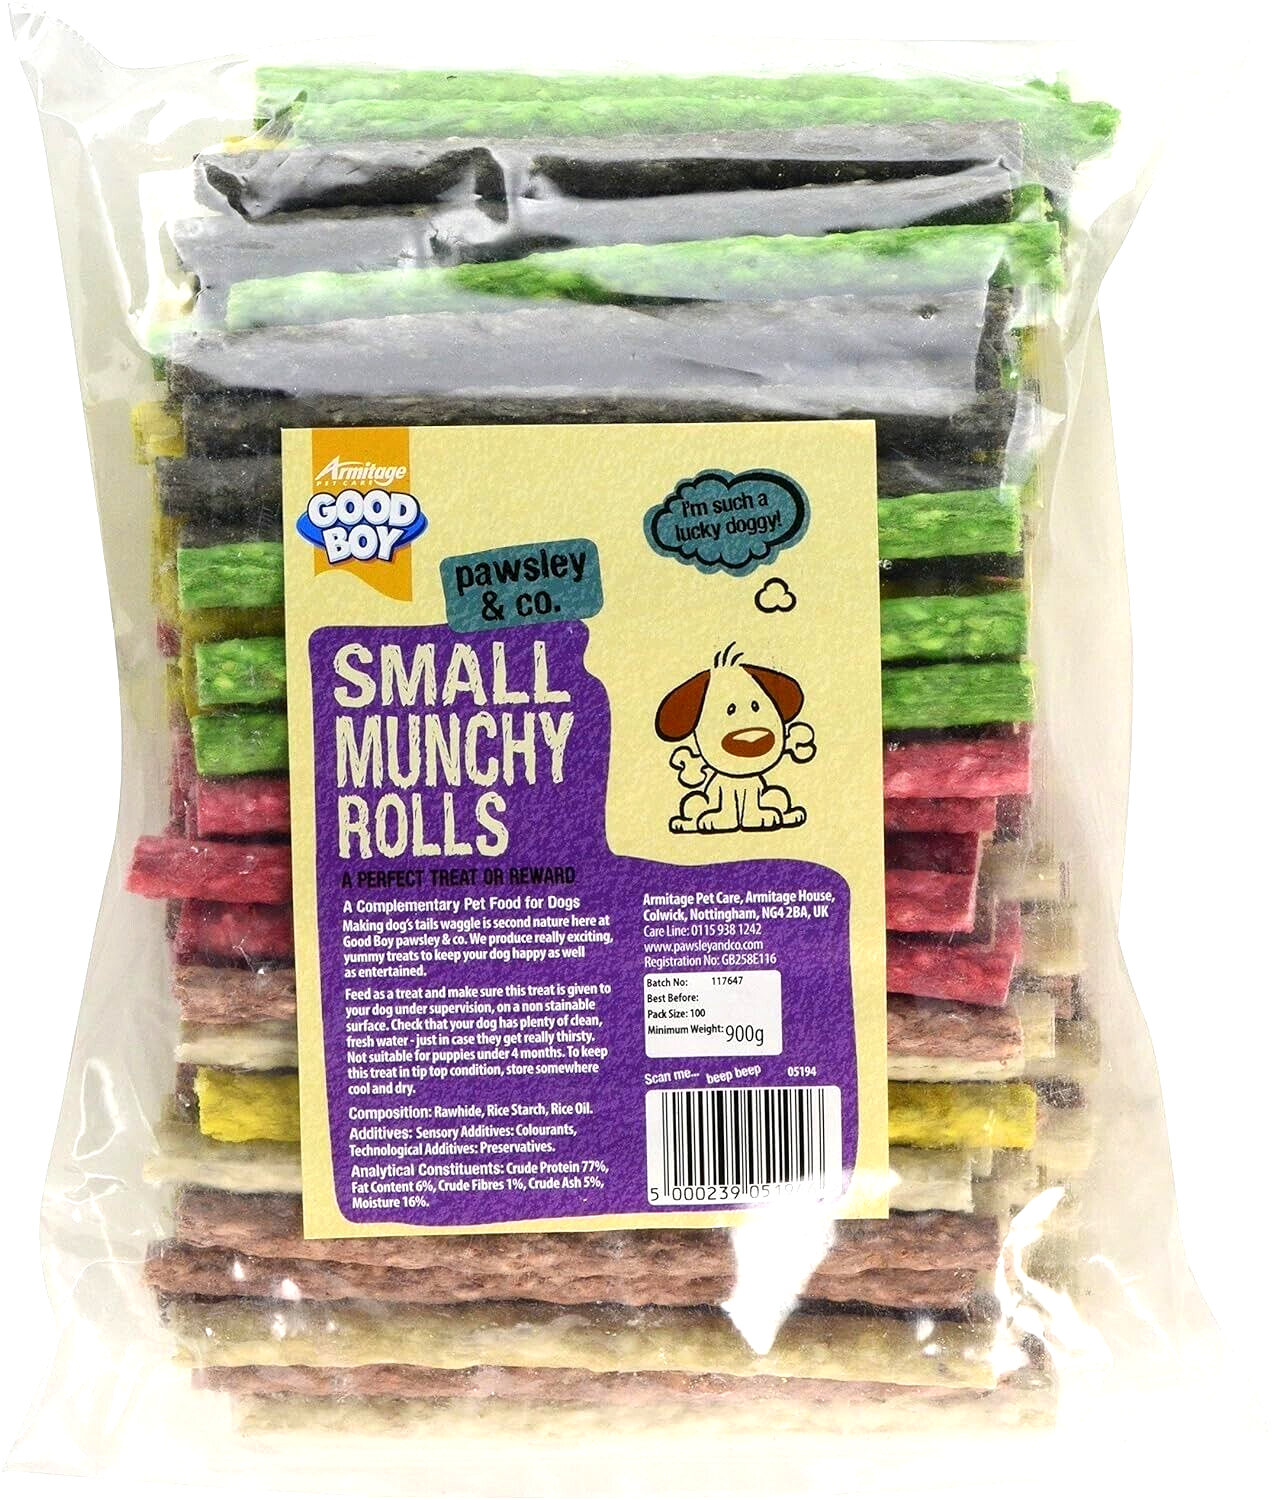 Good Boy Pawsley & Co Small Munchy Rolls 100-Pack